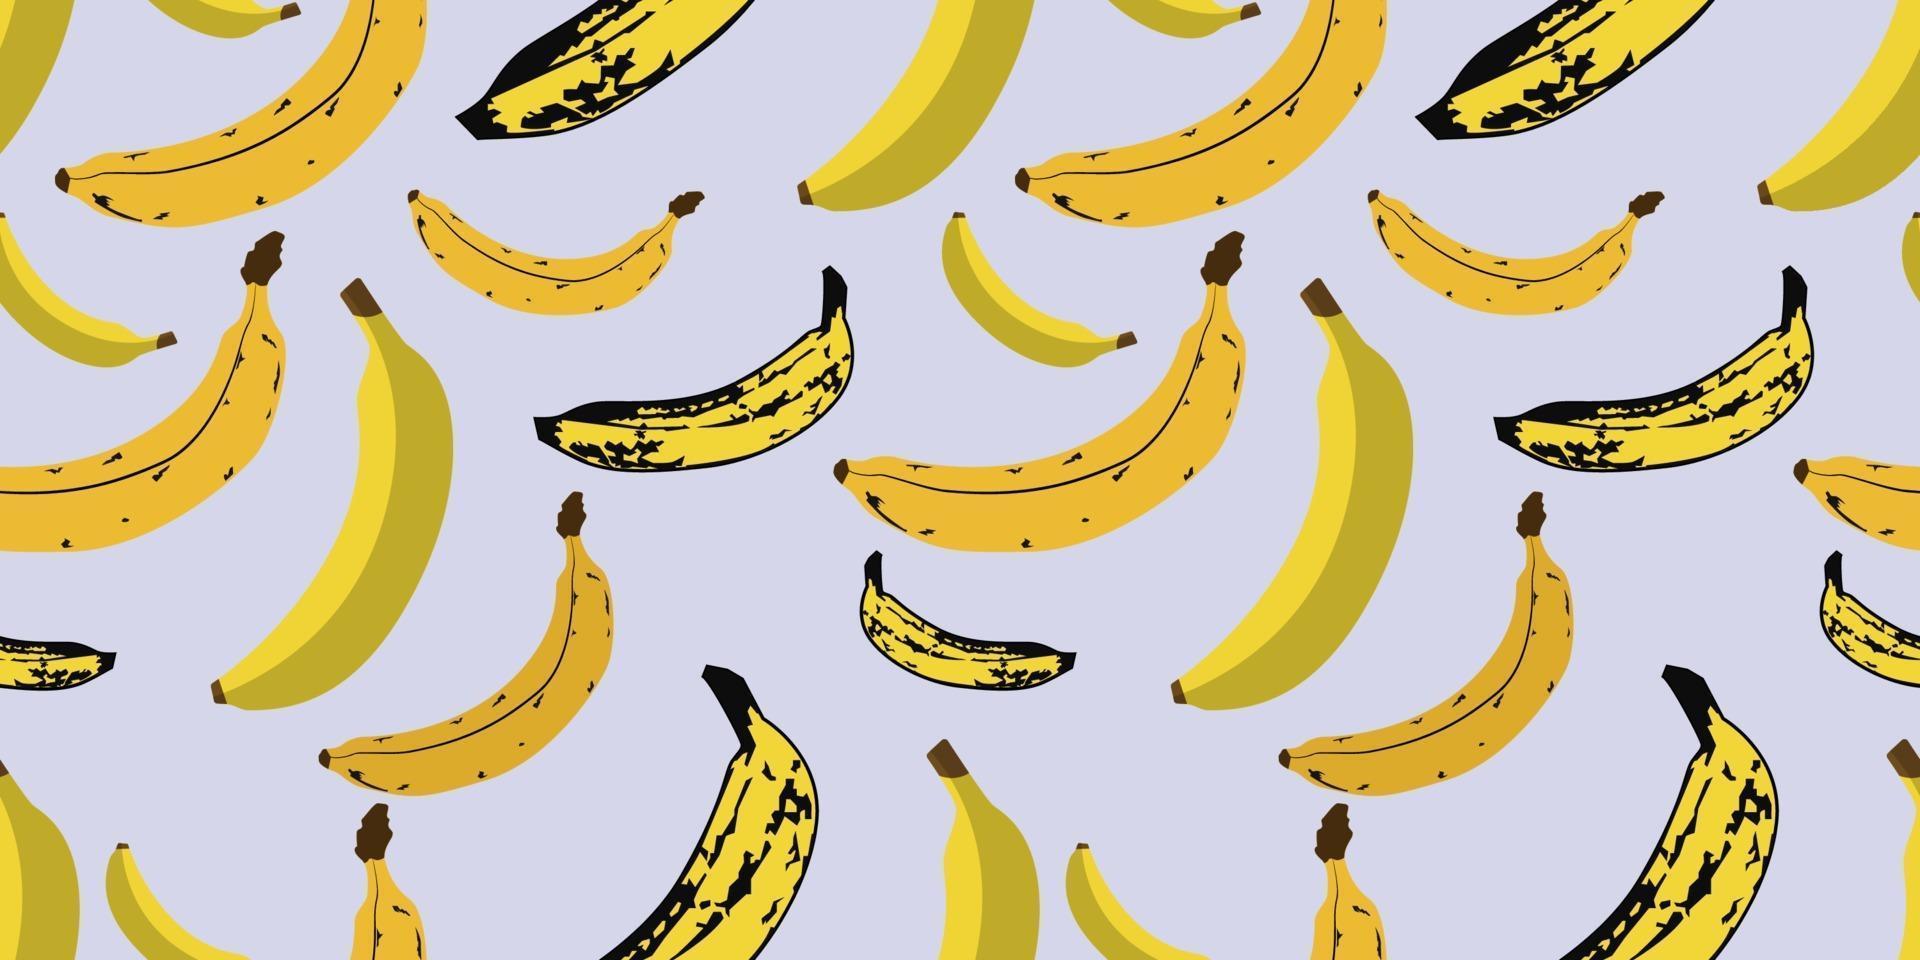 Seamless vector pattern of yellow single bananas and extra ripe bananas randomly distributed isolated on light blue background. Suits for Decorative Paper, Packaging, Covers, Gift Wrap, etc.